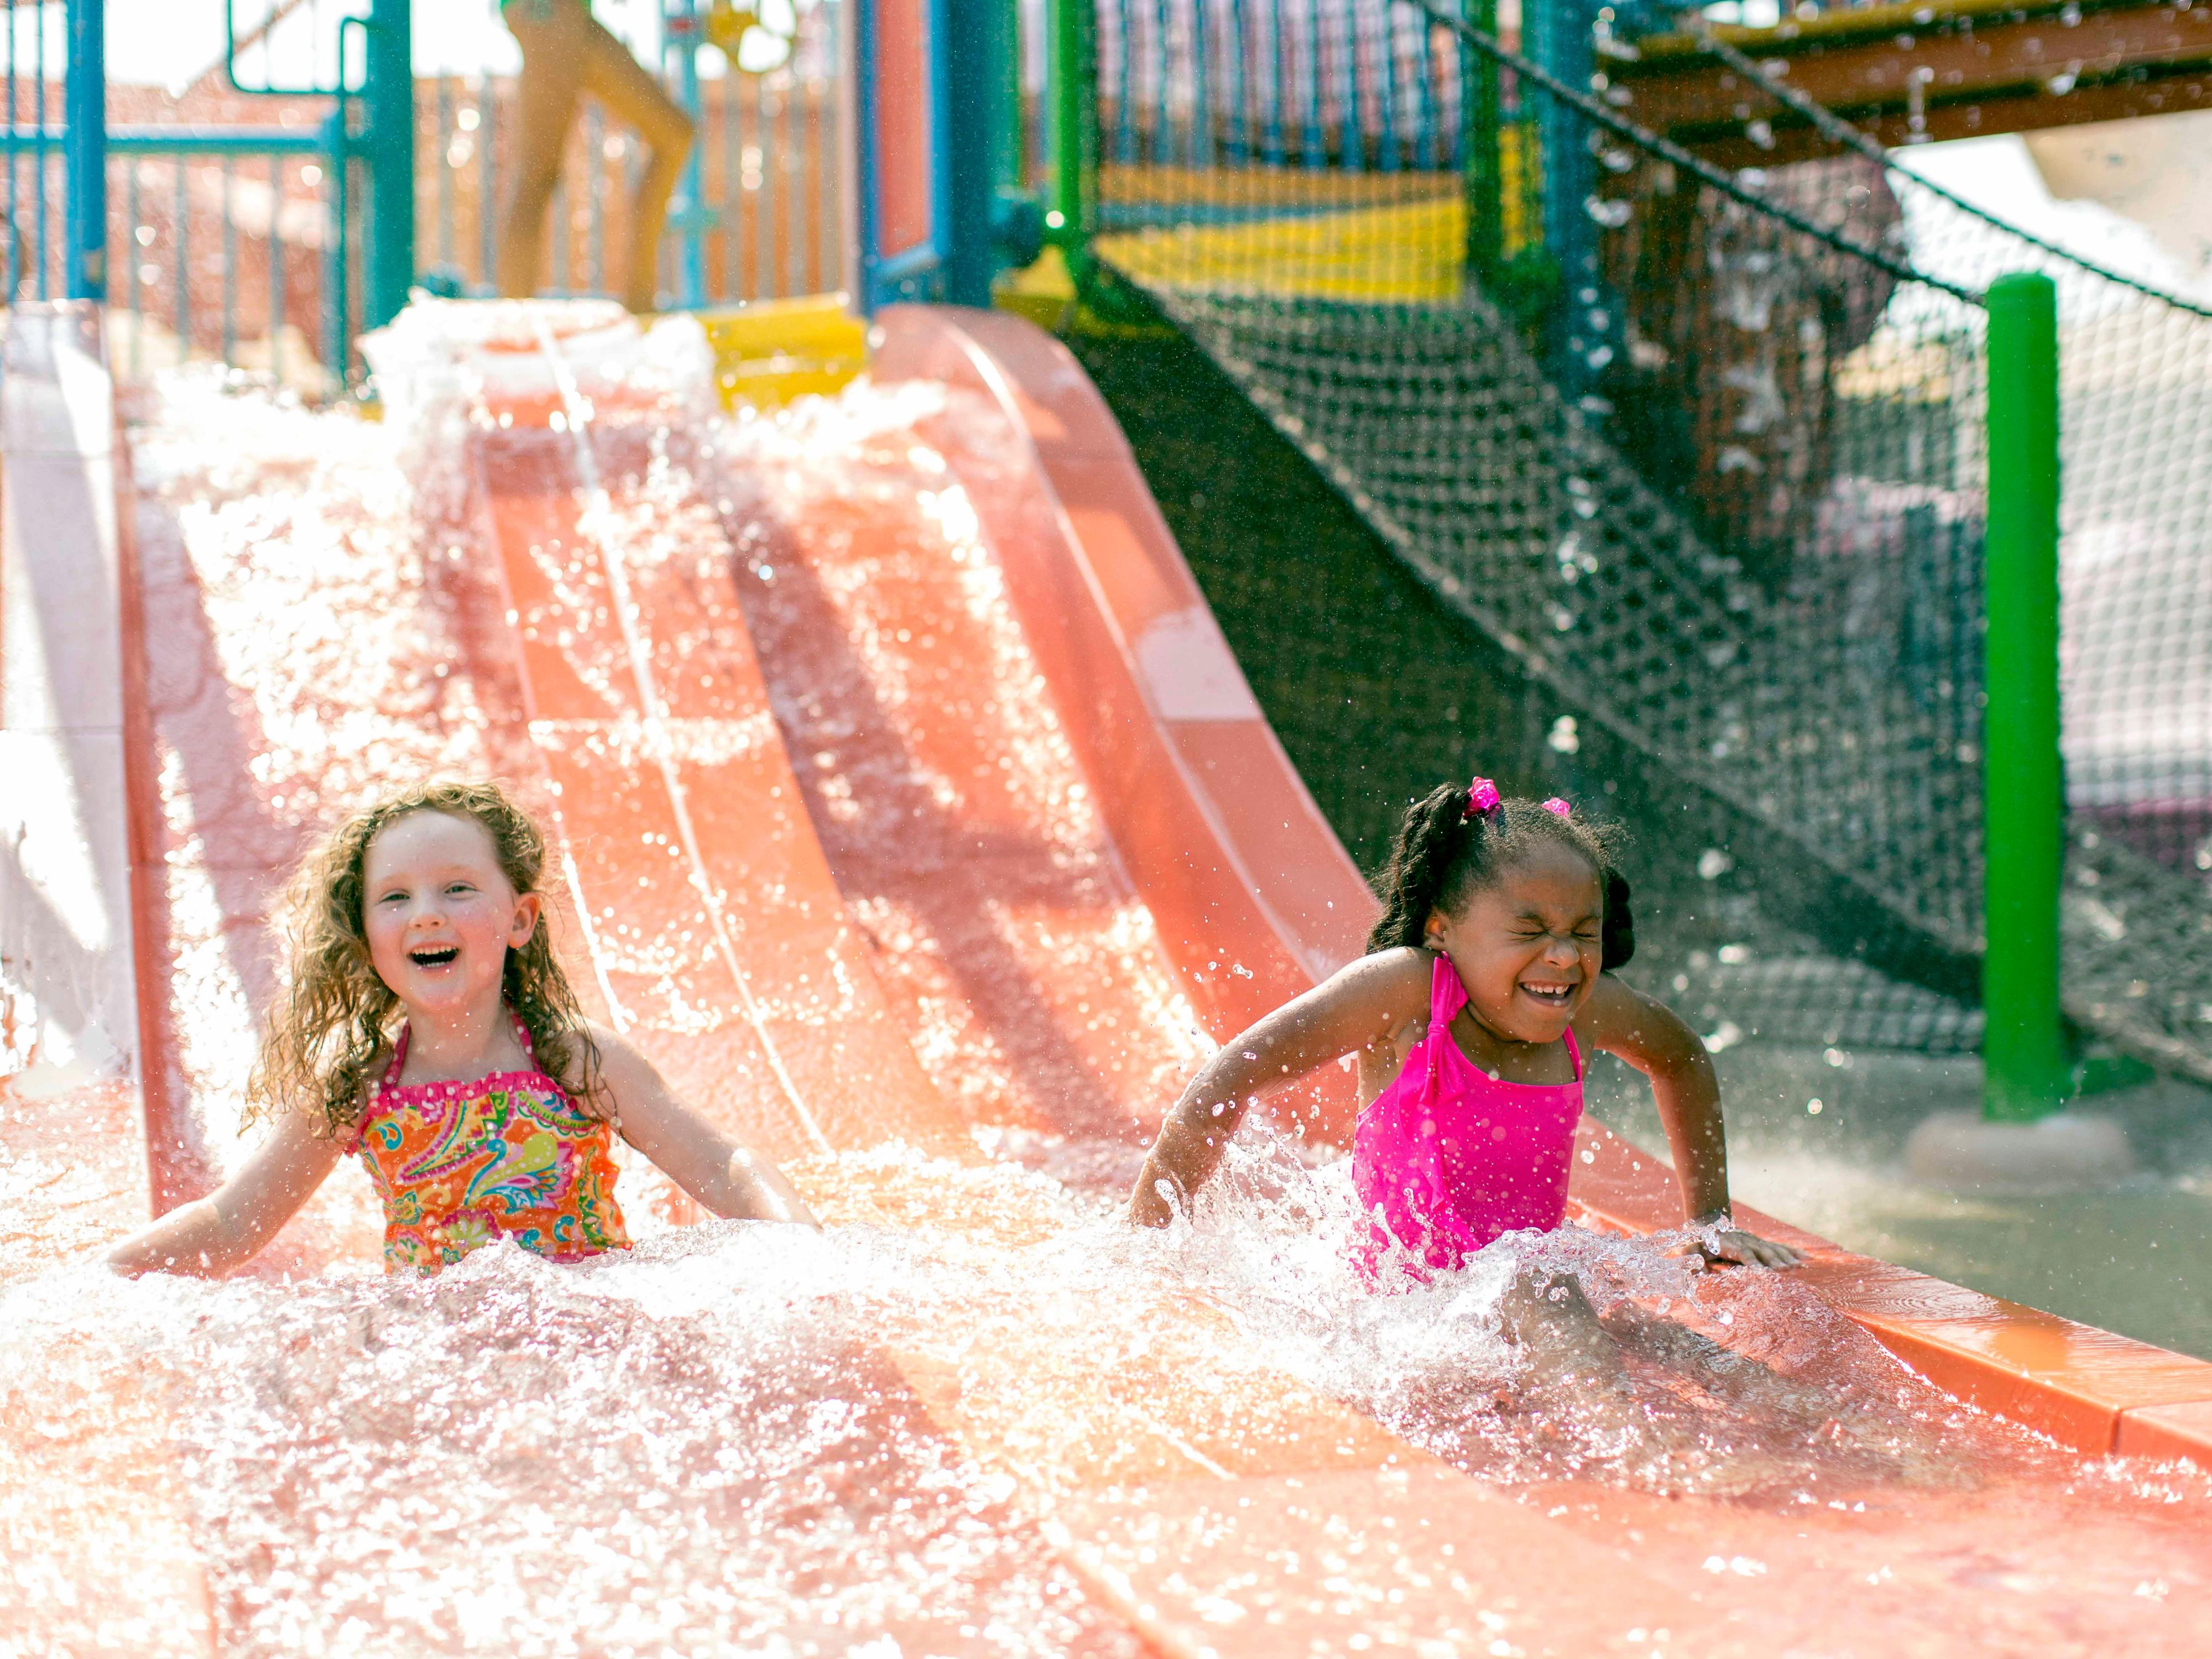 Visit Kings Islands - Soak City and cool off.  (late May-Aug)